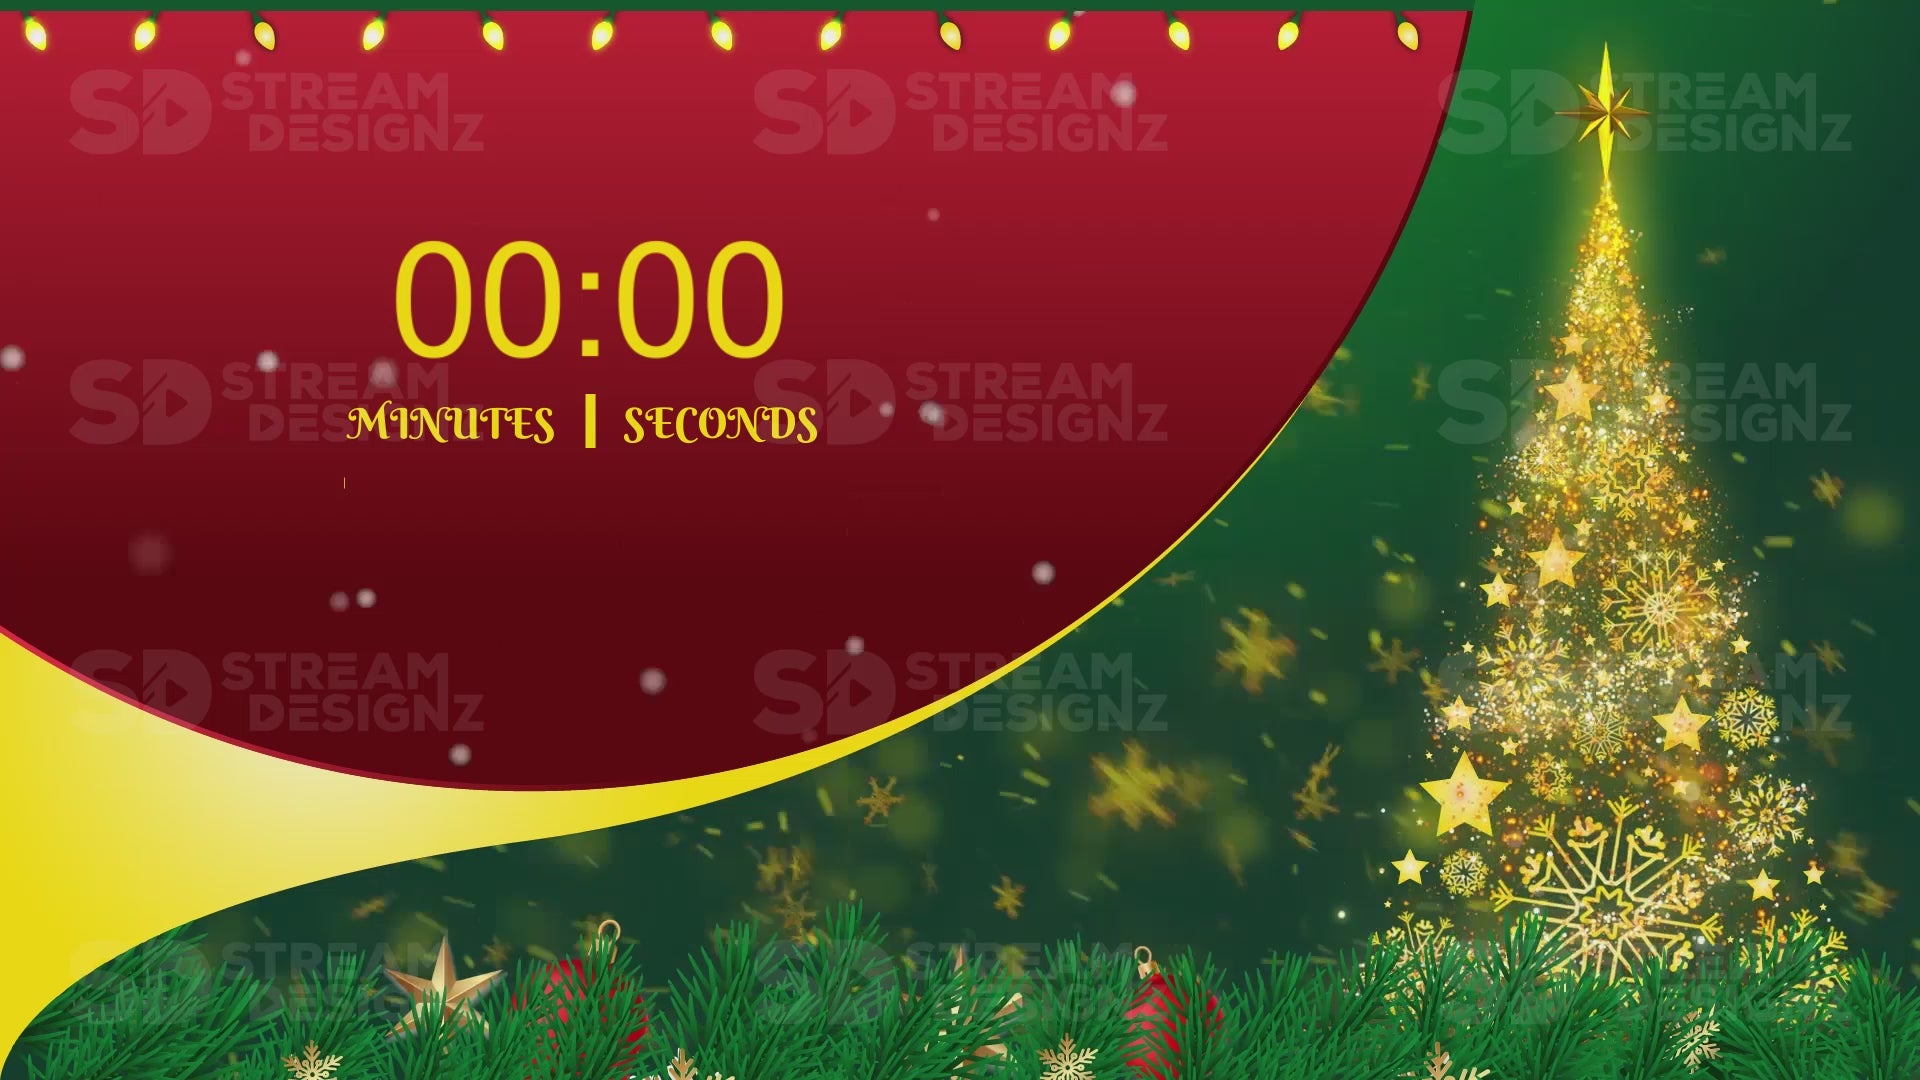 5 minute count up timer merry christmas preview video stream designz